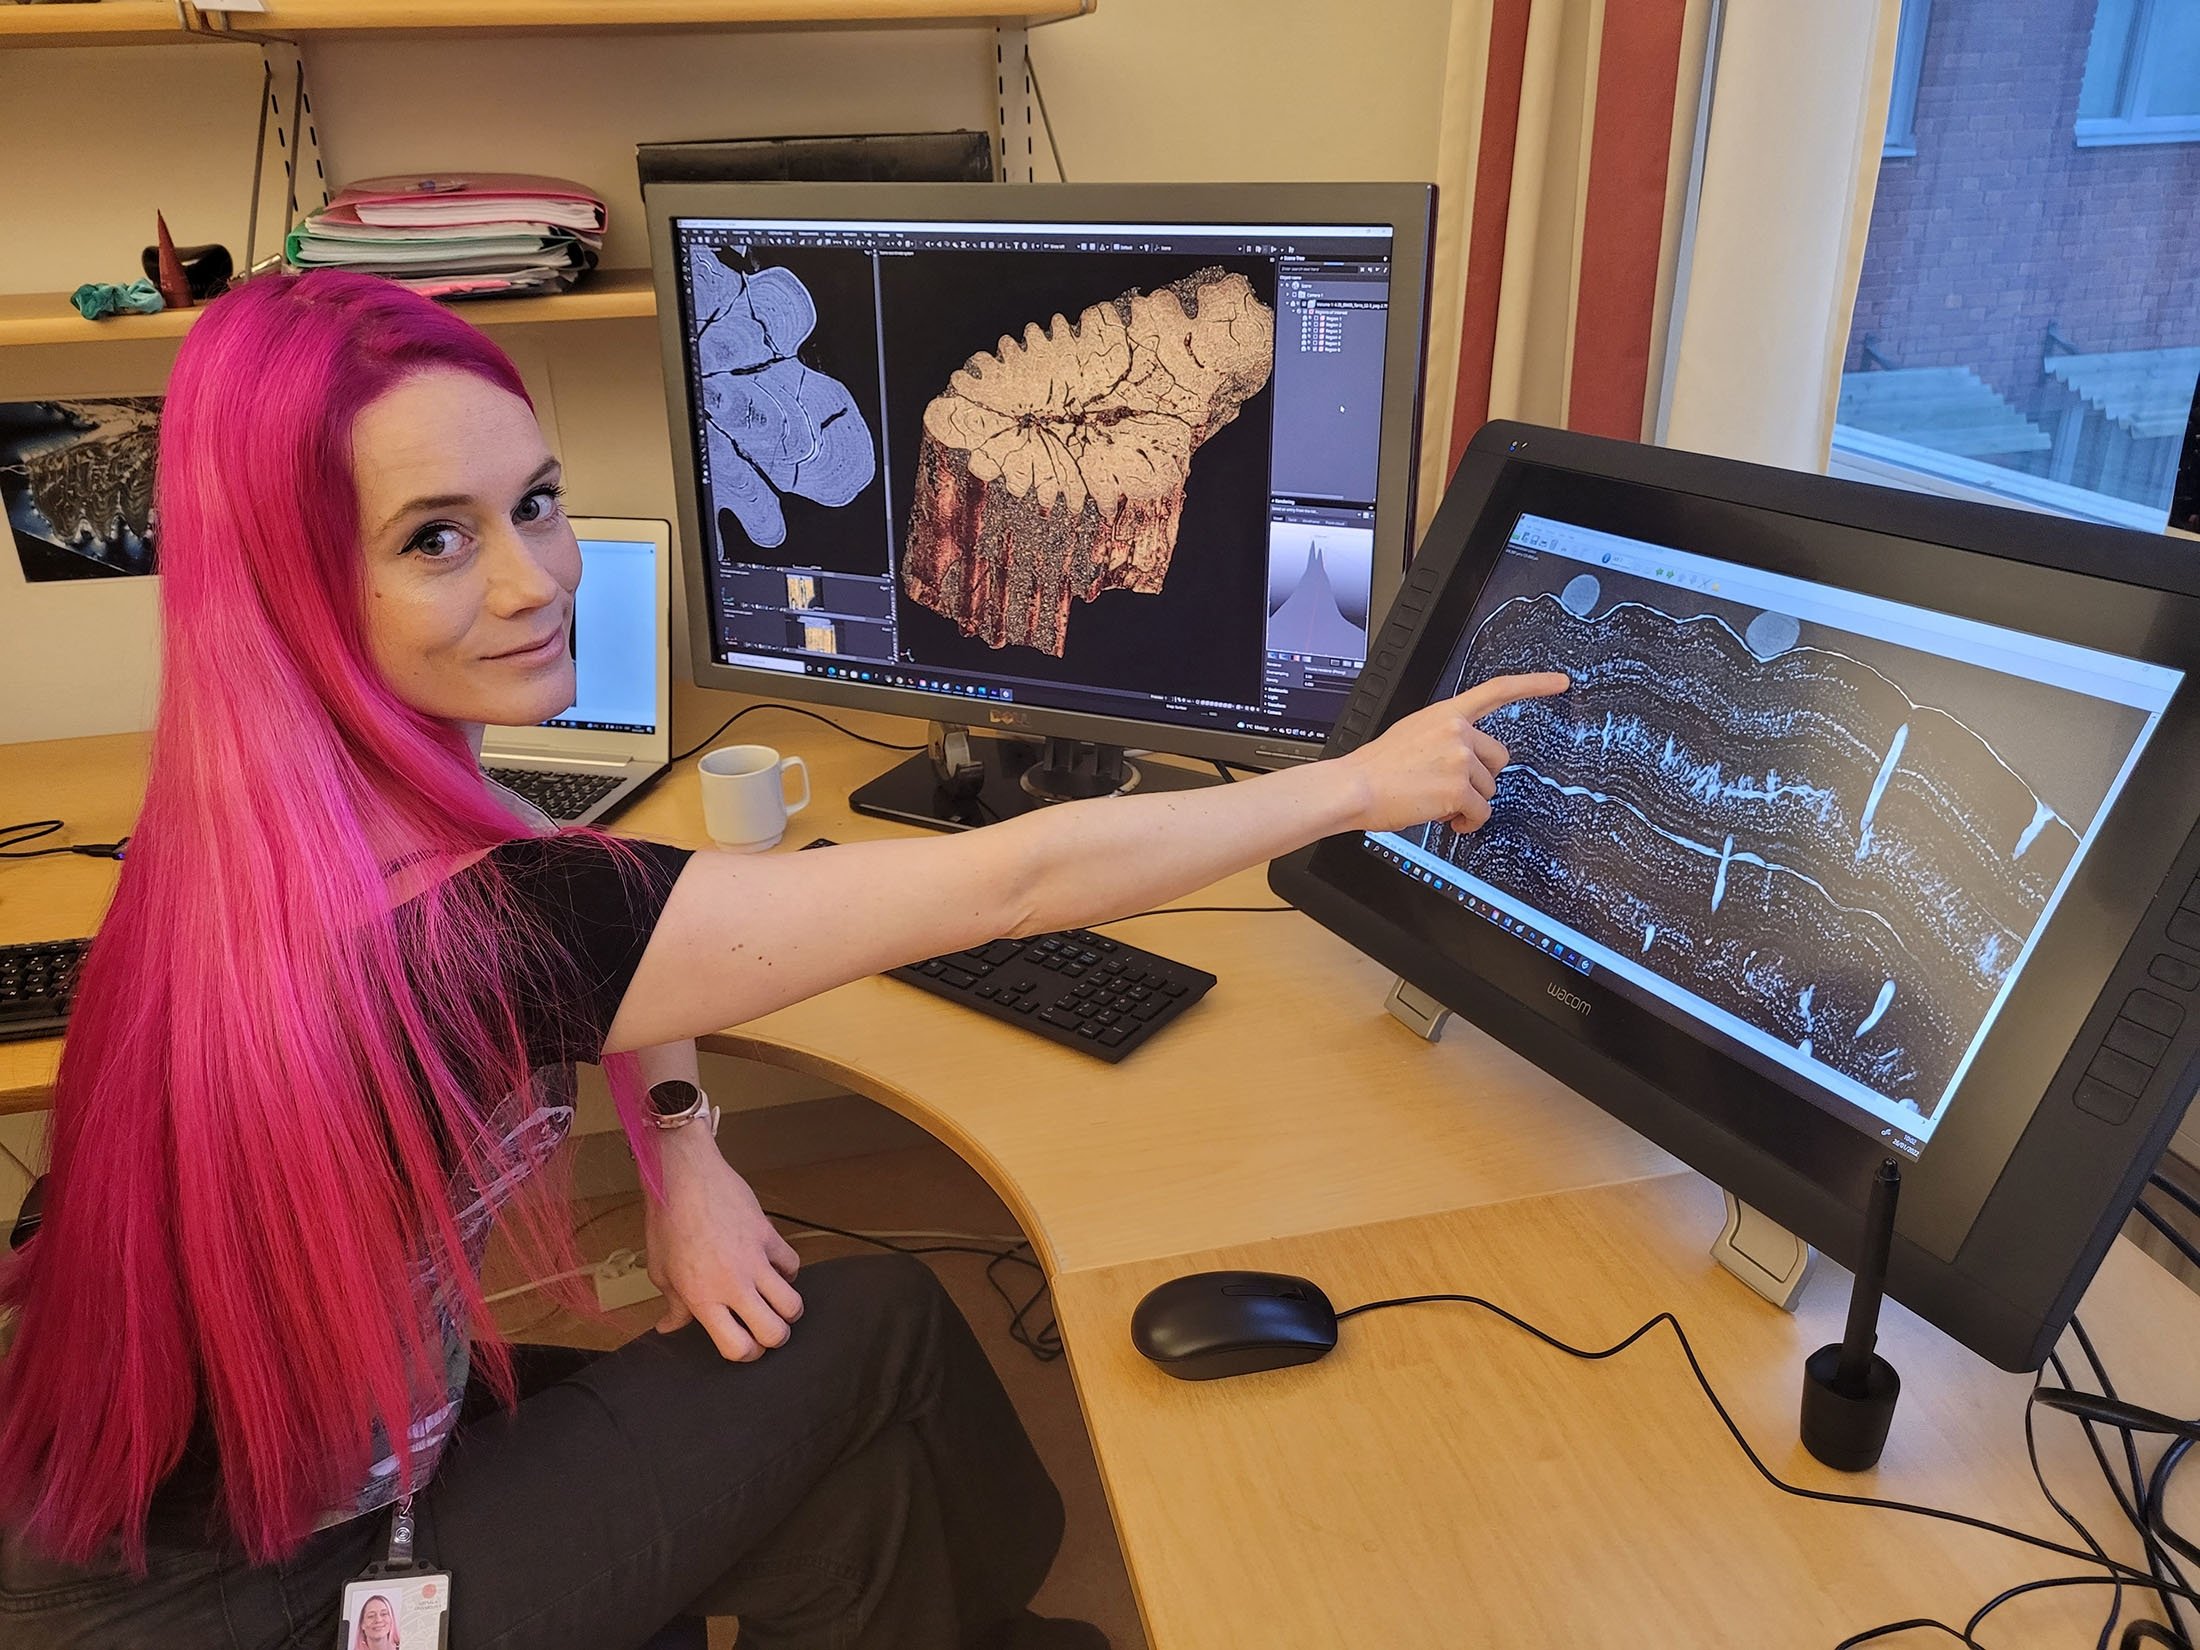 Melanie During, a doctoral student in paleontology, points at an image of a Cretaceous Period paddlefish fossil that bears evidence of the aftermath of the Yucatan asteroid impact, at Uppsala University, in Uppsala, Sweden, Feb. 17, 2022. (Dennis Voeten via Reuters)